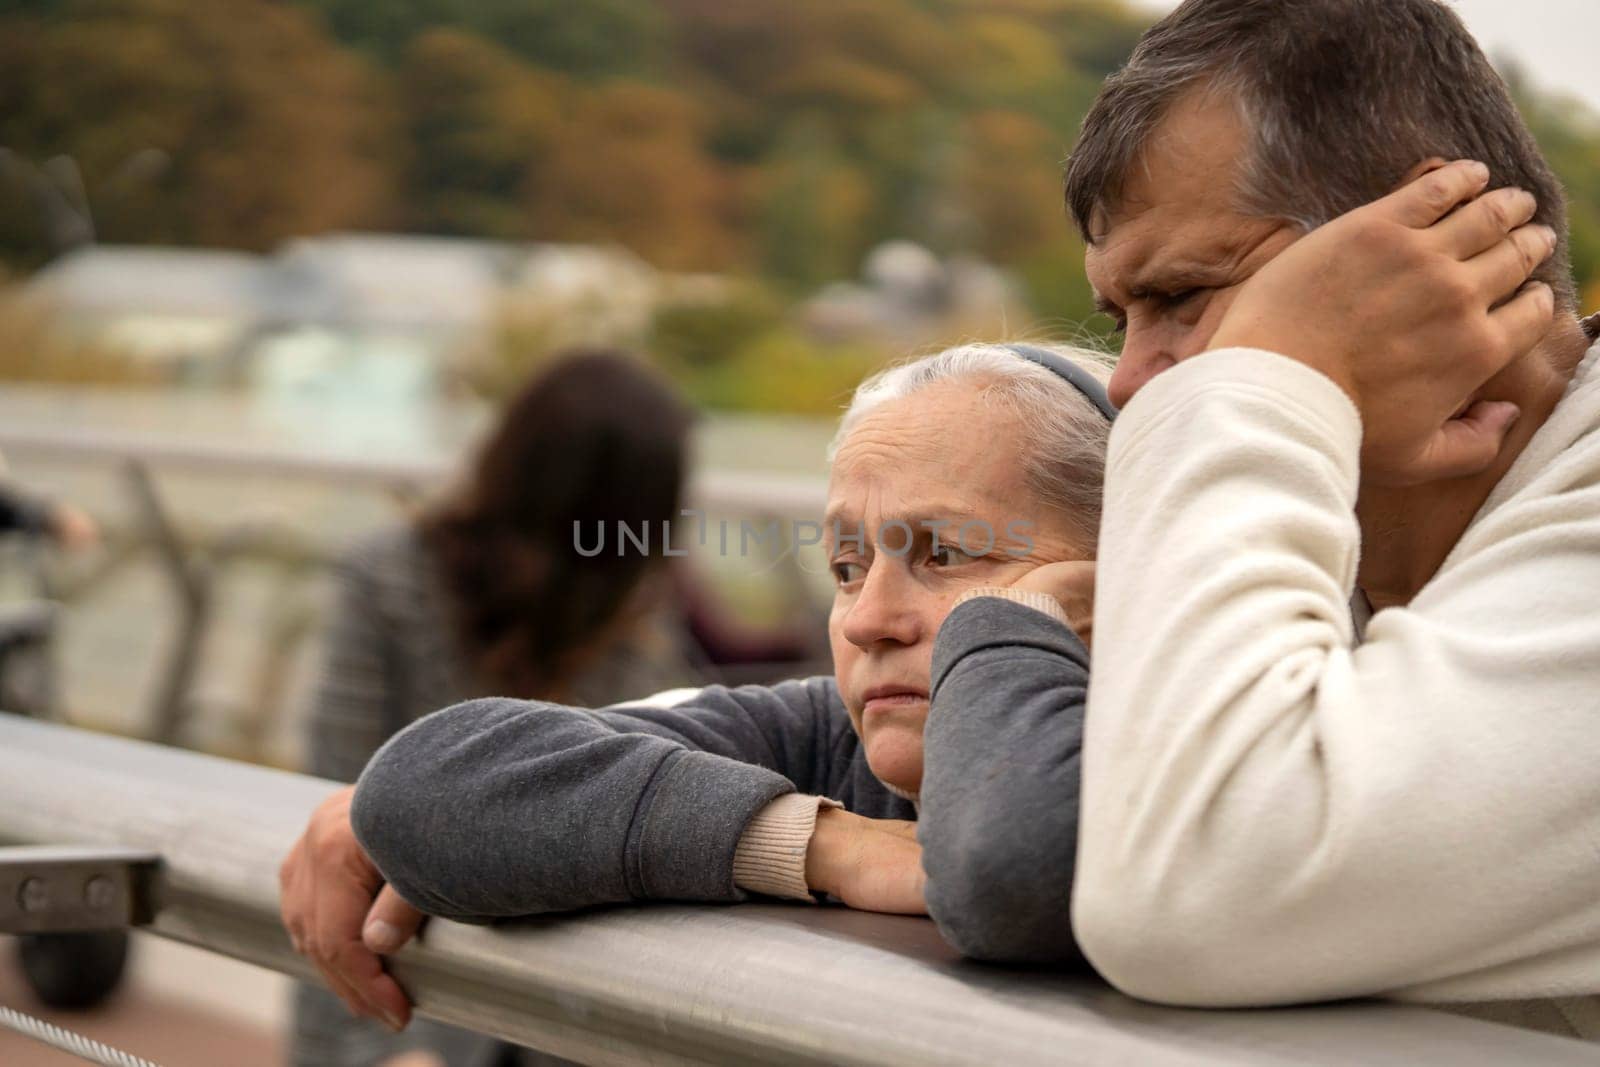 An elderly couple with sad faces outdoors, a man and a woman in an old age are experiencing a crisis in a relationship or depression, support each other in a difficult life moment.